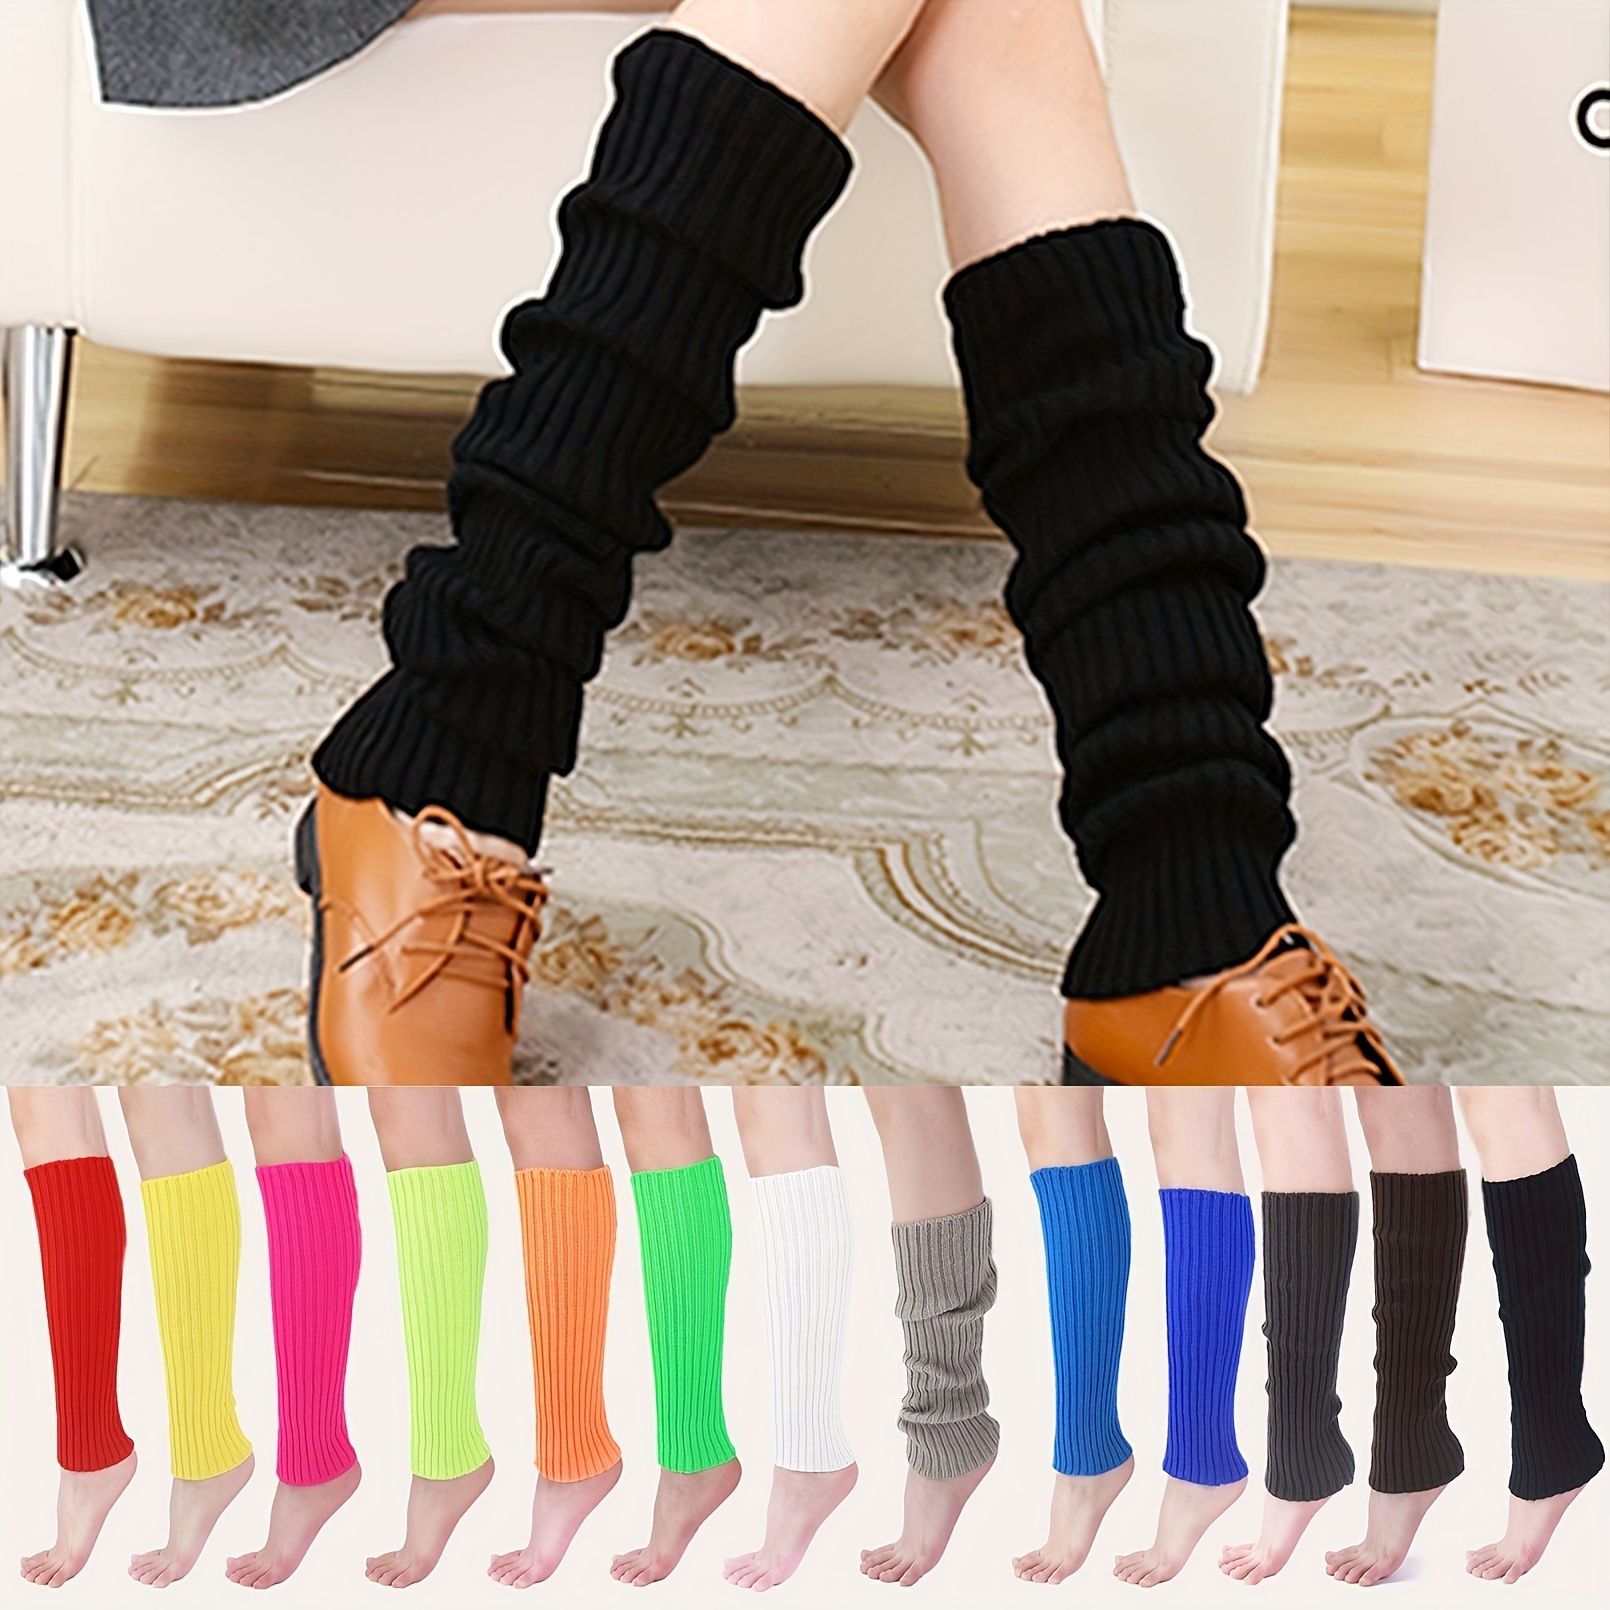 1pair Leg Warmers For Women Girls 80s Ribbed Leg Warmer For Neon Party  Knitted Fall Winter Sports Socks,40 Cm